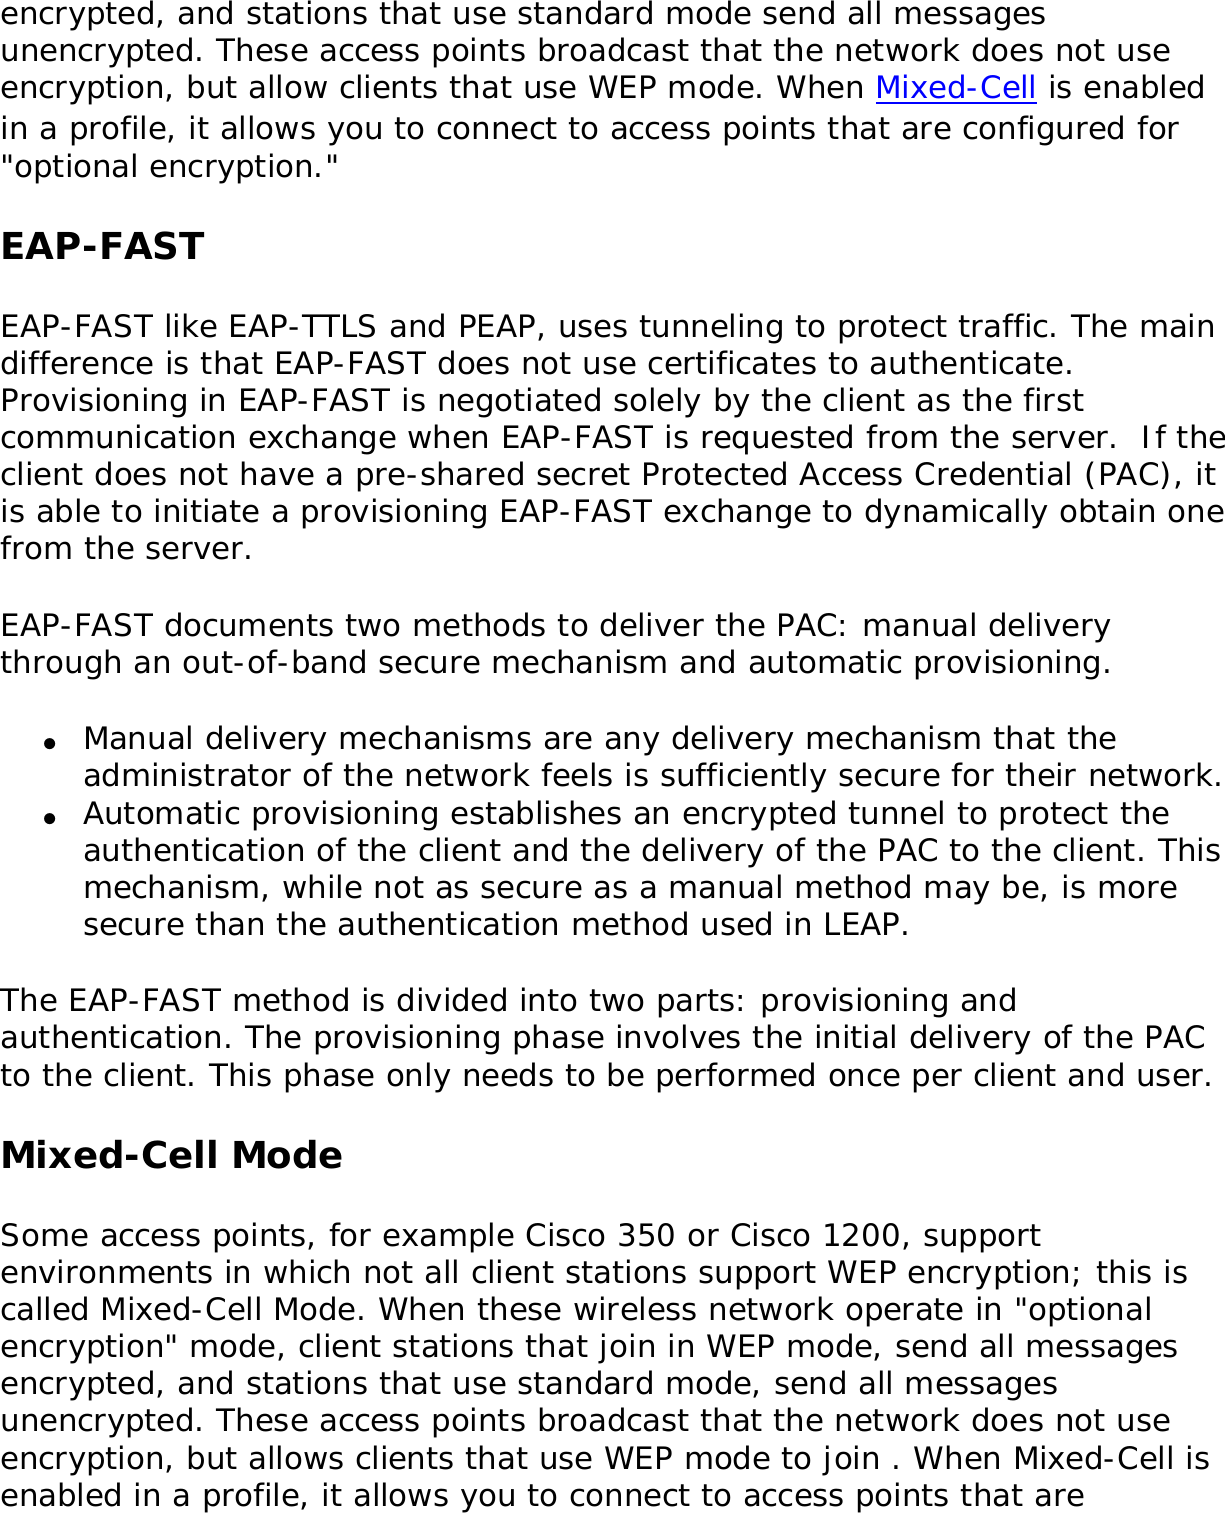 encrypted, and stations that use standard mode send all messages unencrypted. These access points broadcast that the network does not use encryption, but allow clients that use WEP mode. When Mixed-Cell is enabled in a profile, it allows you to connect to access points that are configured for &quot;optional encryption.&quot; EAP-FASTEAP-FAST like EAP-TTLS and PEAP, uses tunneling to protect traffic. The main difference is that EAP-FAST does not use certificates to authenticate. Provisioning in EAP-FAST is negotiated solely by the client as the first communication exchange when EAP-FAST is requested from the server.  If the client does not have a pre-shared secret Protected Access Credential (PAC), it is able to initiate a provisioning EAP-FAST exchange to dynamically obtain one from the server. EAP-FAST documents two methods to deliver the PAC: manual delivery through an out-of-band secure mechanism and automatic provisioning. ●     Manual delivery mechanisms are any delivery mechanism that the administrator of the network feels is sufficiently secure for their network. ●     Automatic provisioning establishes an encrypted tunnel to protect the authentication of the client and the delivery of the PAC to the client. This mechanism, while not as secure as a manual method may be, is more secure than the authentication method used in LEAP. The EAP-FAST method is divided into two parts: provisioning and authentication. The provisioning phase involves the initial delivery of the PAC to the client. This phase only needs to be performed once per client and user. Mixed-Cell ModeSome access points, for example Cisco 350 or Cisco 1200, support environments in which not all client stations support WEP encryption; this is called Mixed-Cell Mode. When these wireless network operate in &quot;optional encryption&quot; mode, client stations that join in WEP mode, send all messages encrypted, and stations that use standard mode, send all messages unencrypted. These access points broadcast that the network does not use encryption, but allows clients that use WEP mode to join . When Mixed-Cell is enabled in a profile, it allows you to connect to access points that are 